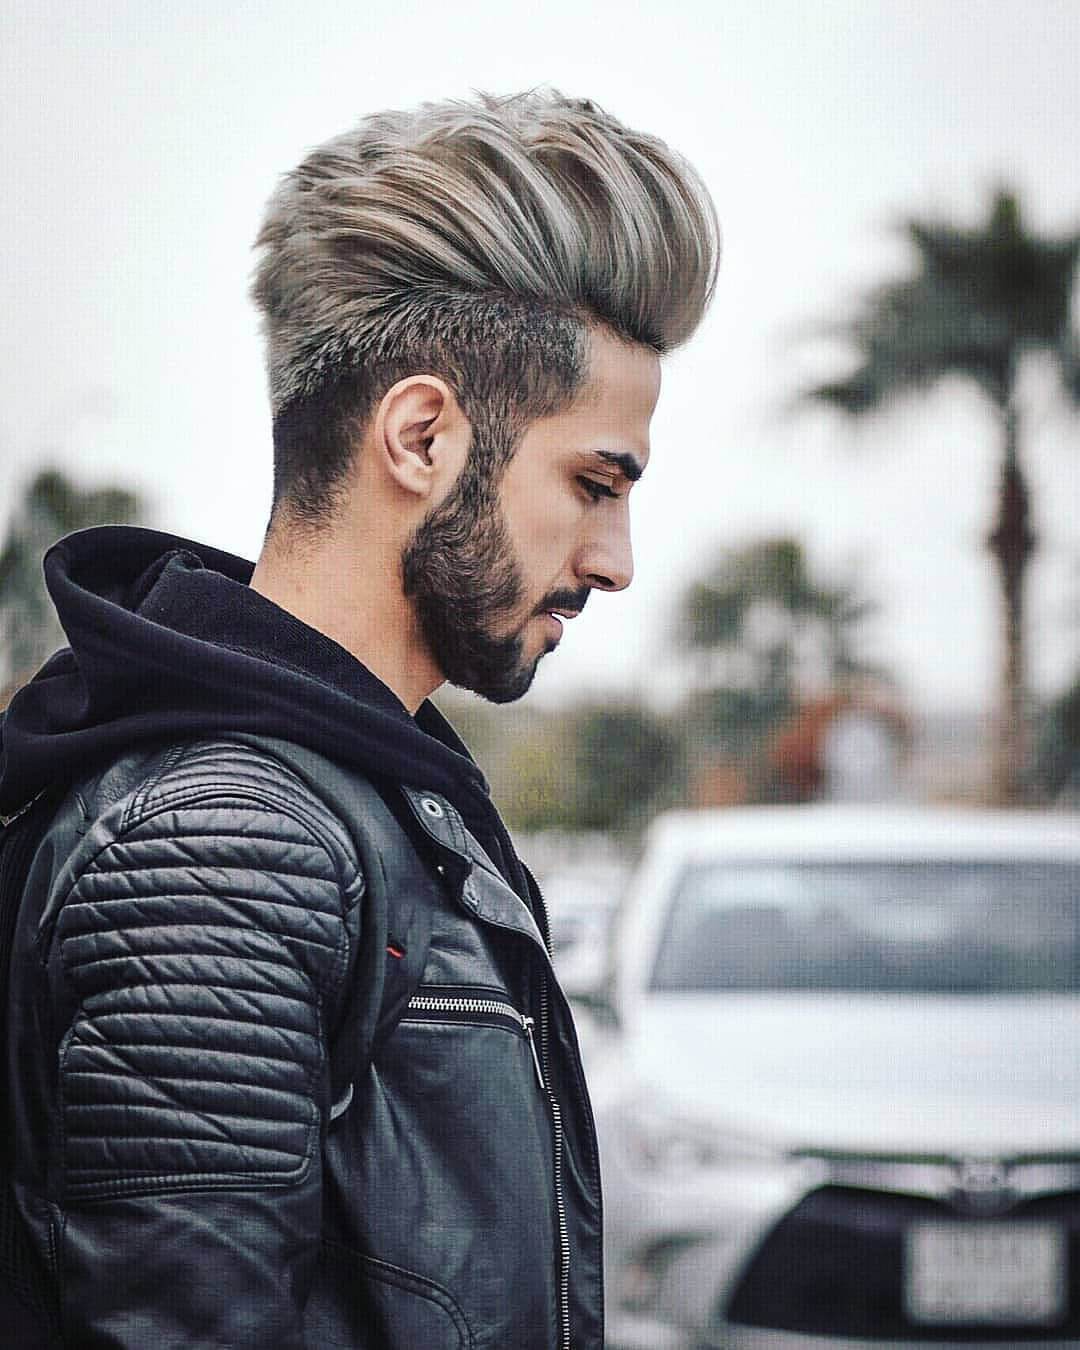 Mens hairstyles 2021 in grunge style. 10 Men S Haircut Trends For Short Hair 2020 2021 Popular Haircuts